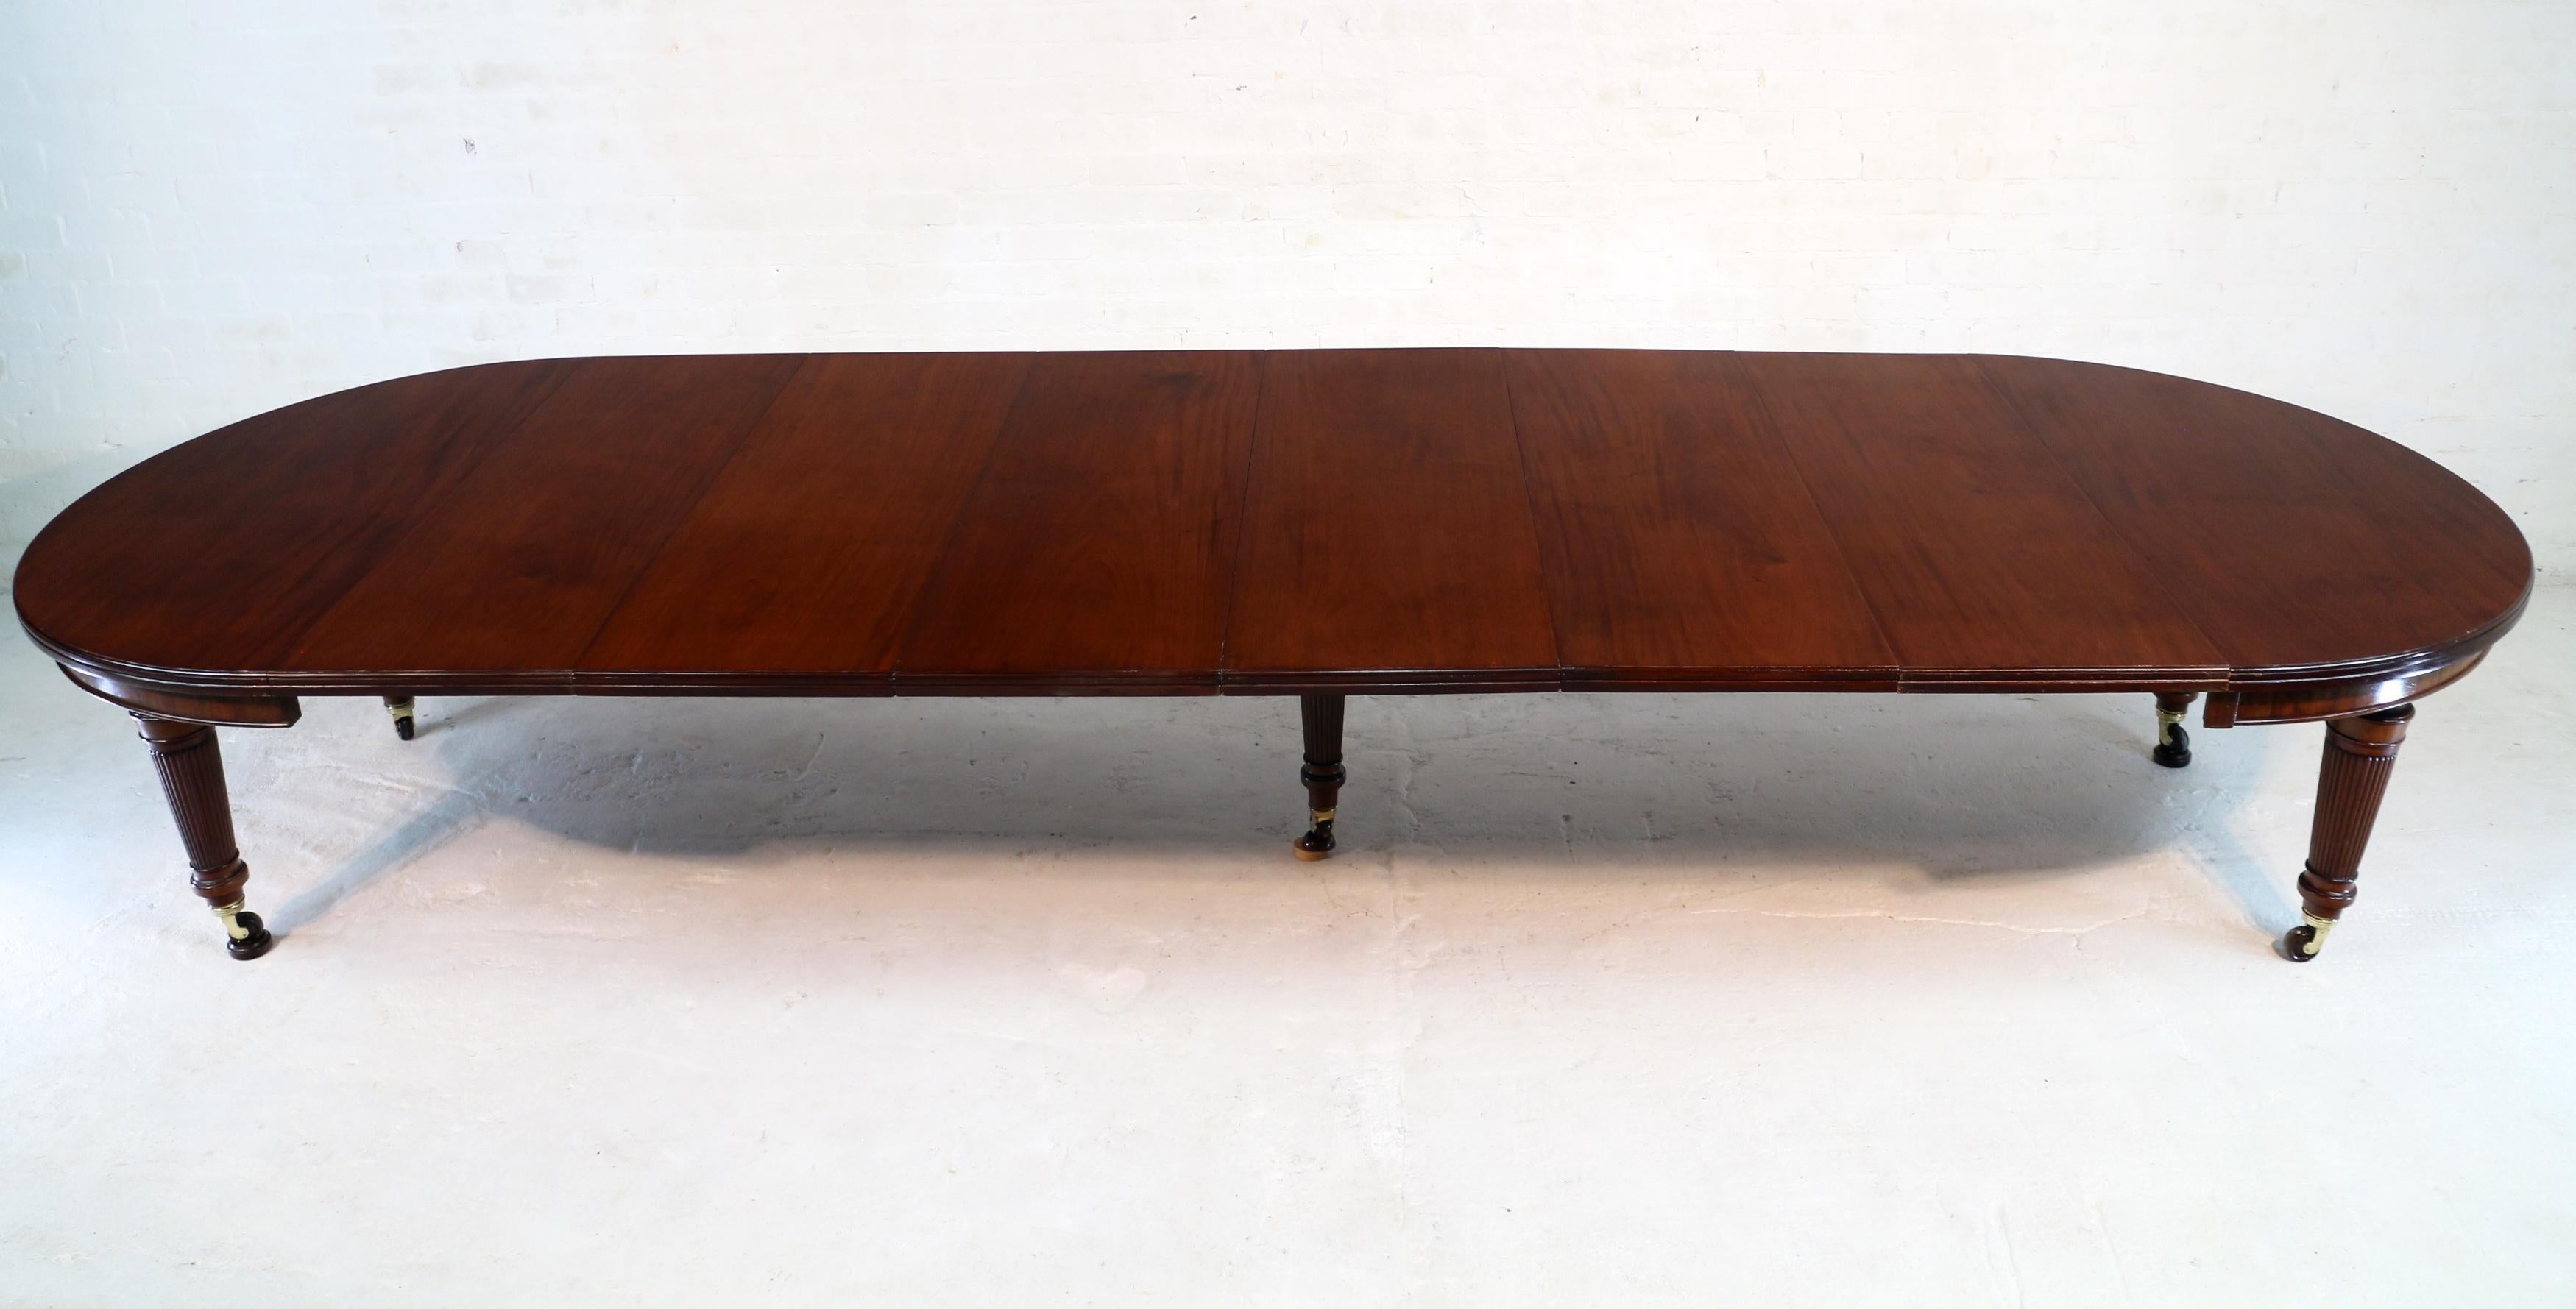 19th Century Antique English Military Campaign Mahogany Extending Dining Table & 6 Leaves